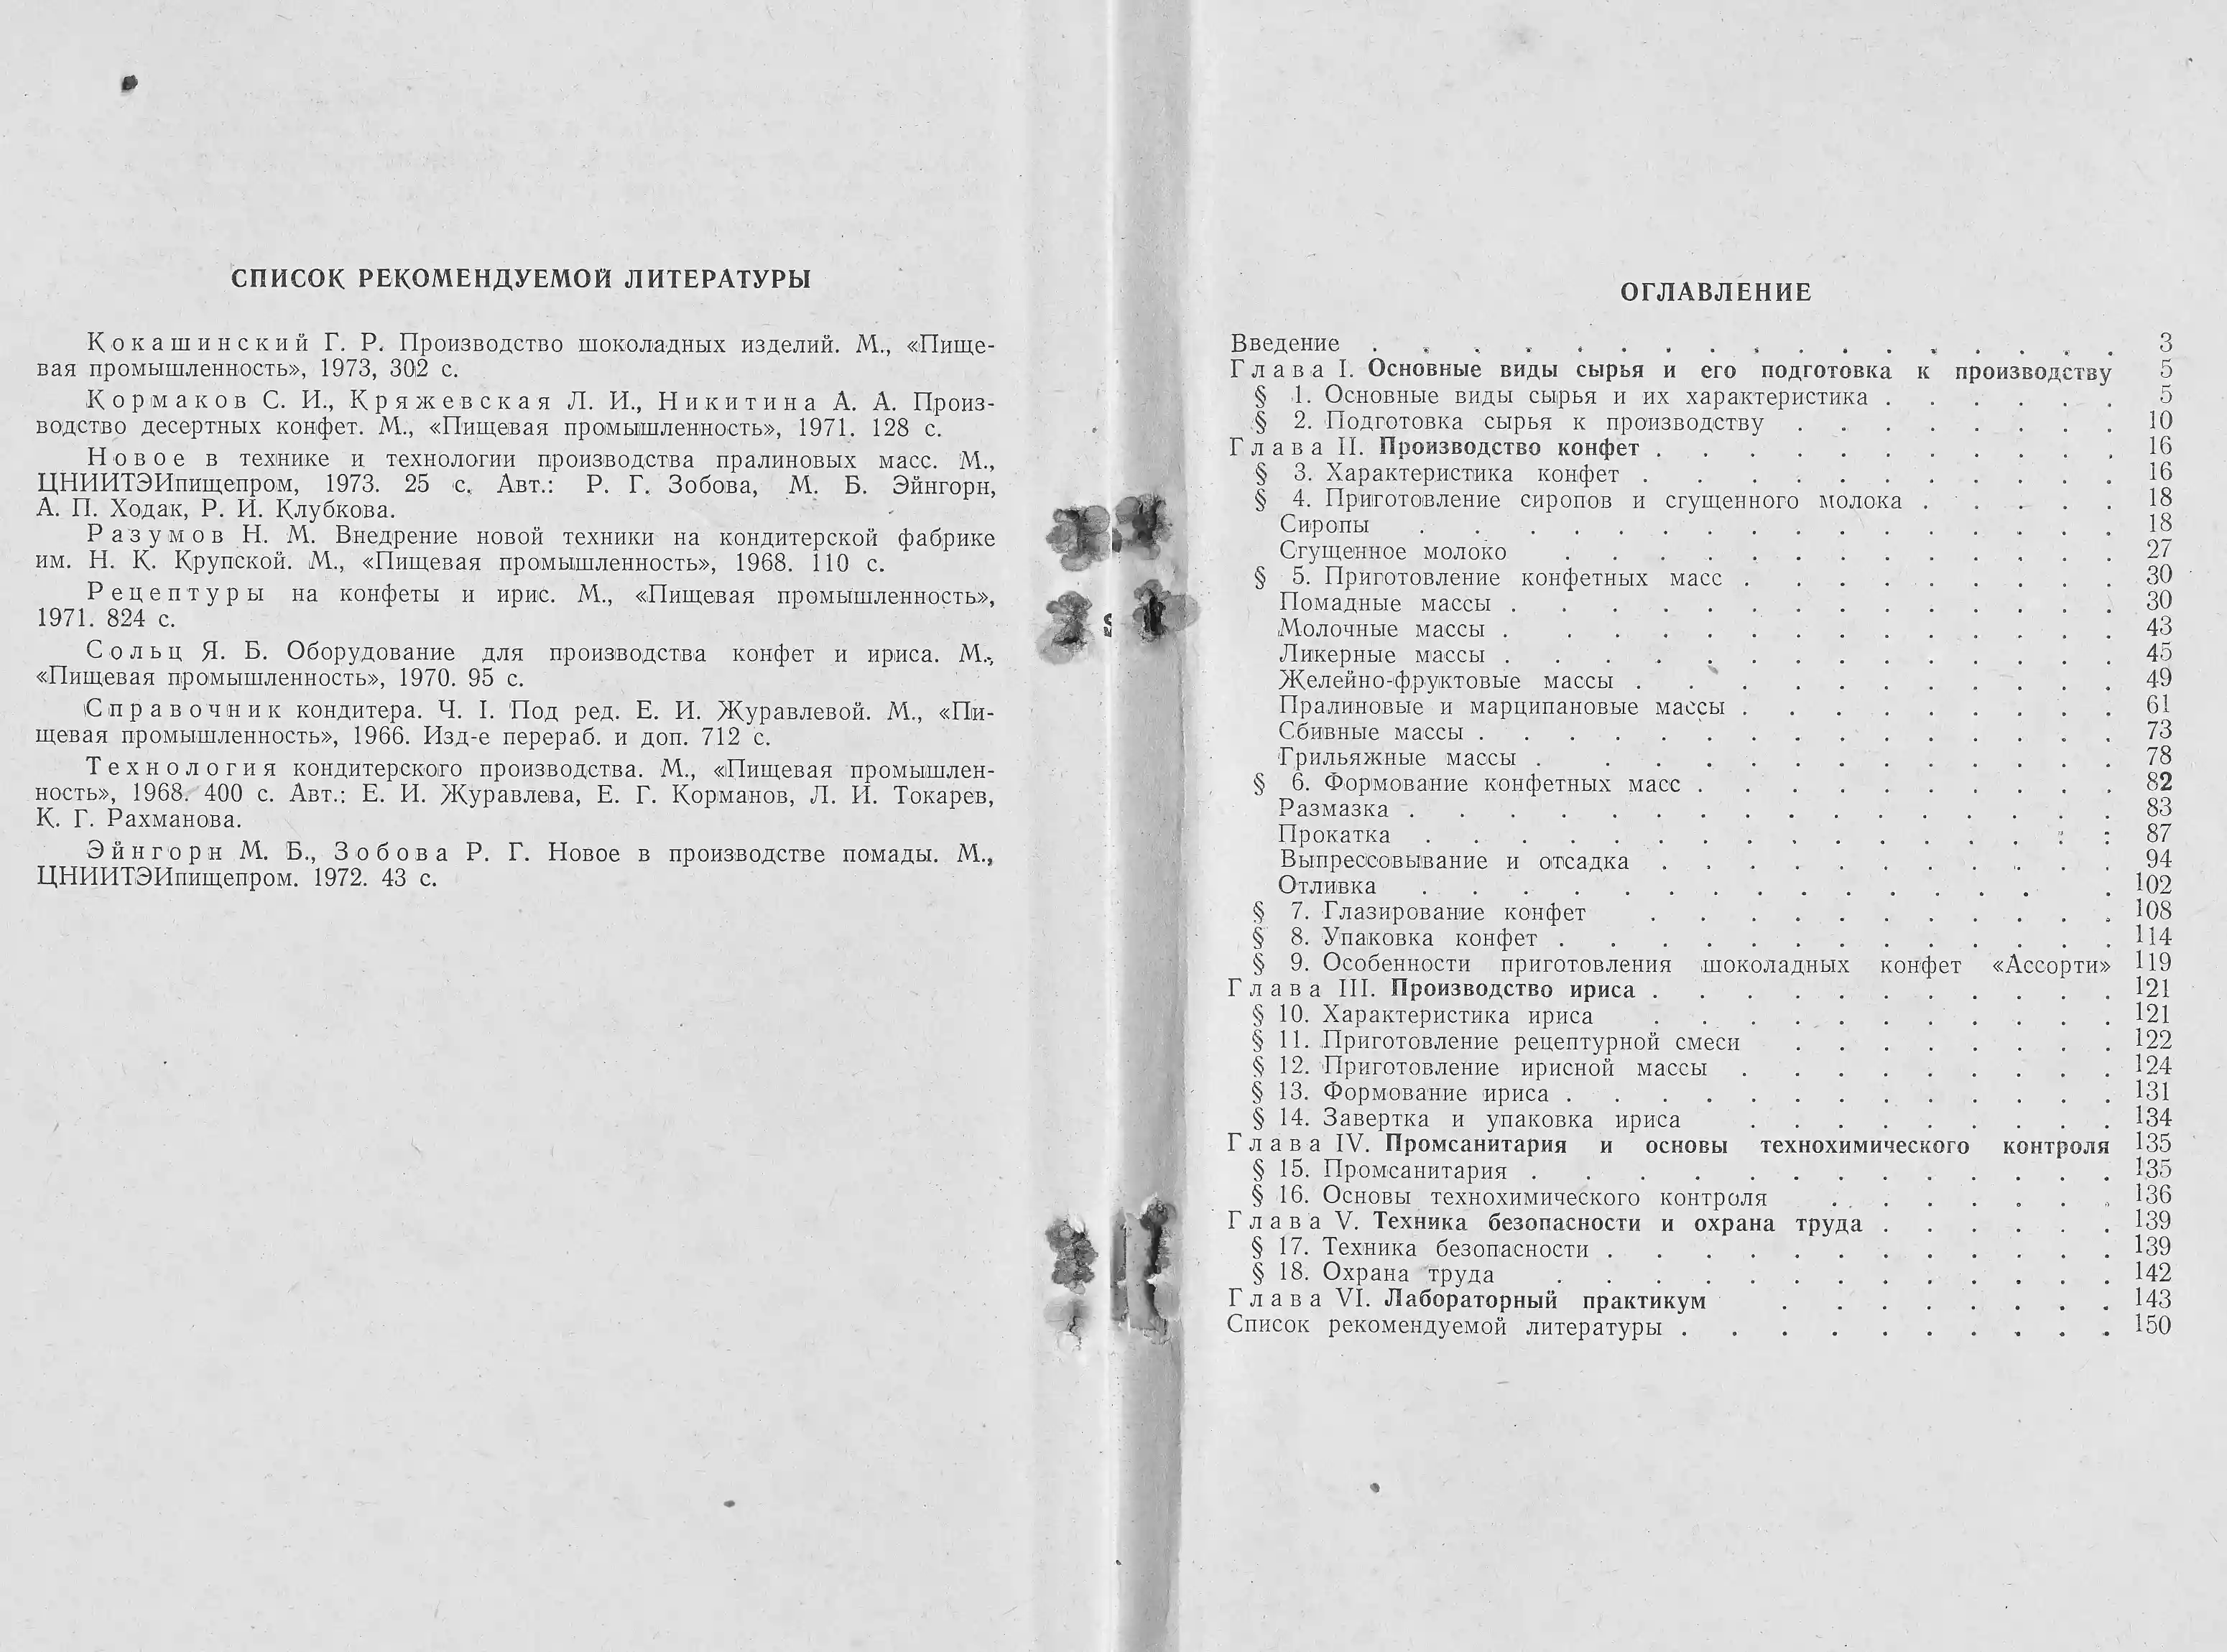 Technology of sweets and iris N.V. Karusheva 1976  pages 150‒151